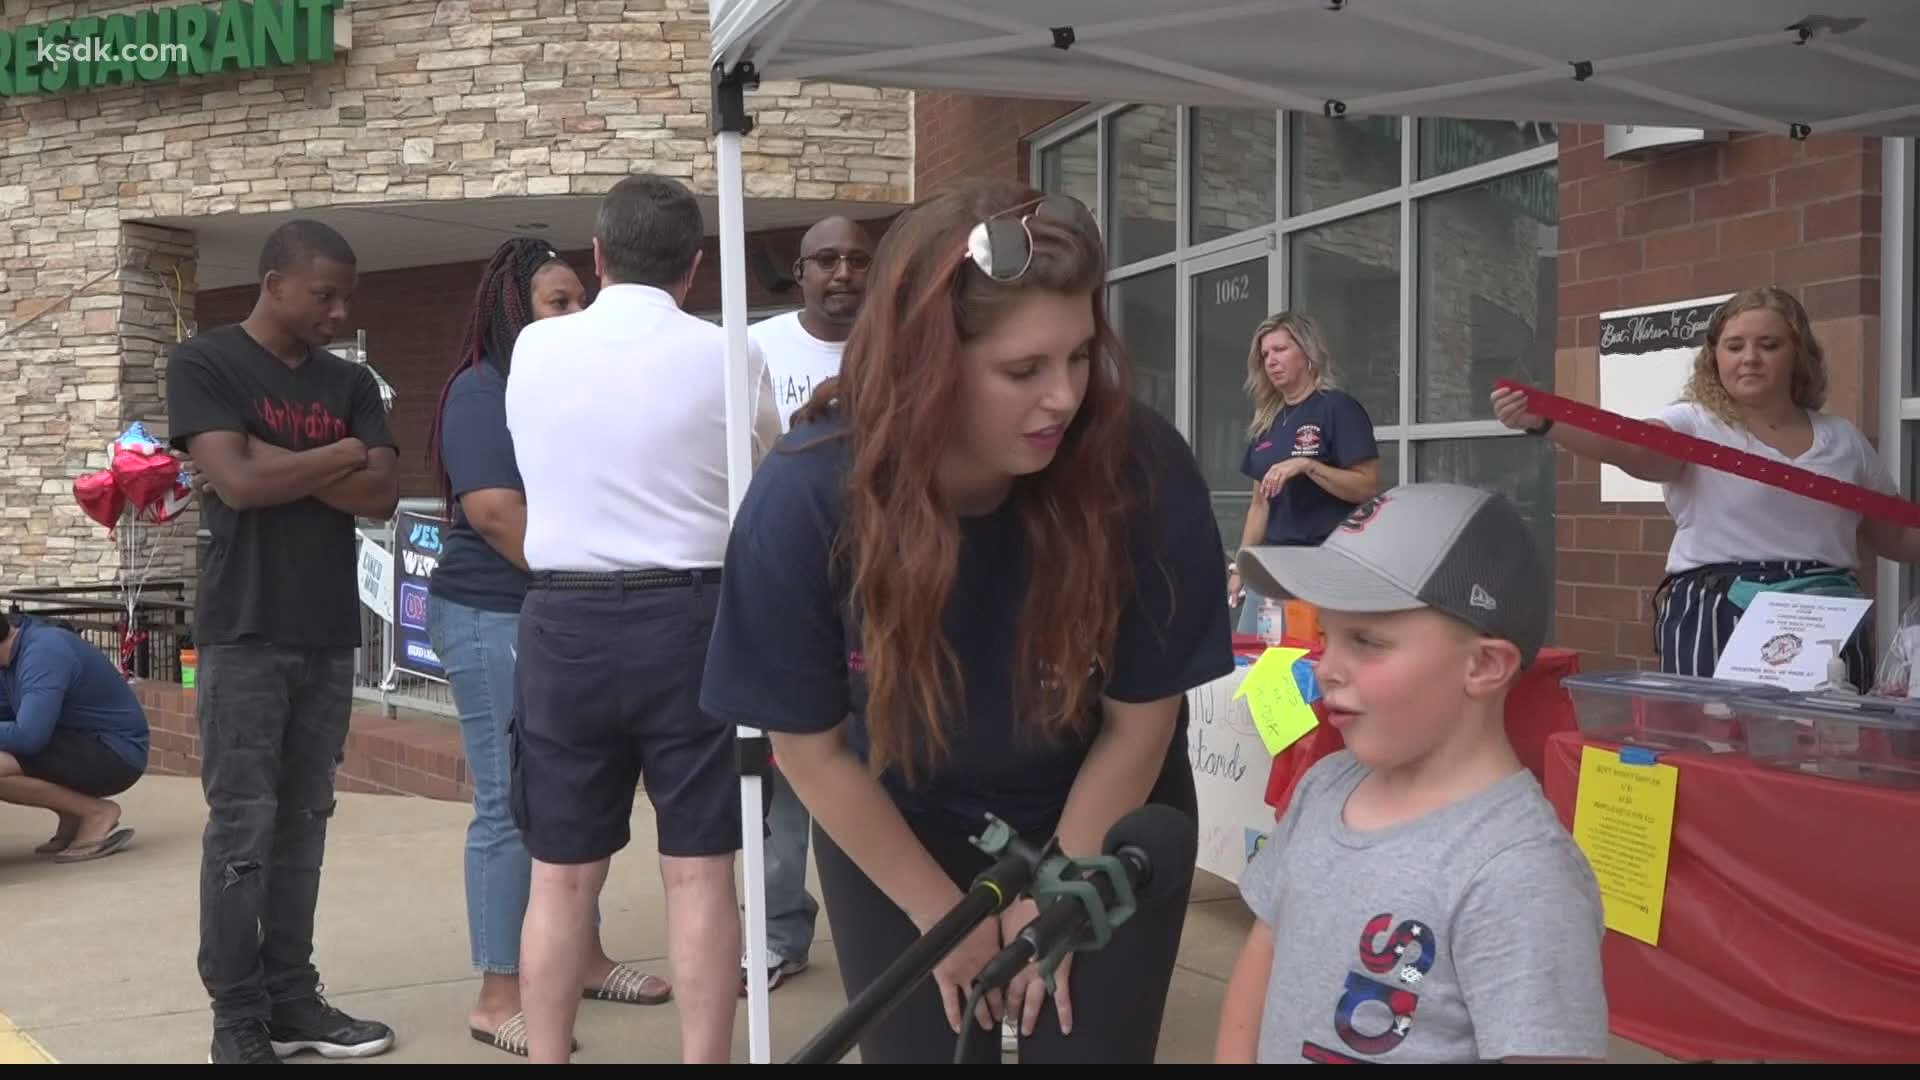 Cooper Wallweber is getting the honor after helping raise more than $6,000 for a volunteer firefighter hurt in a shooting at a St. John's Applebee's.